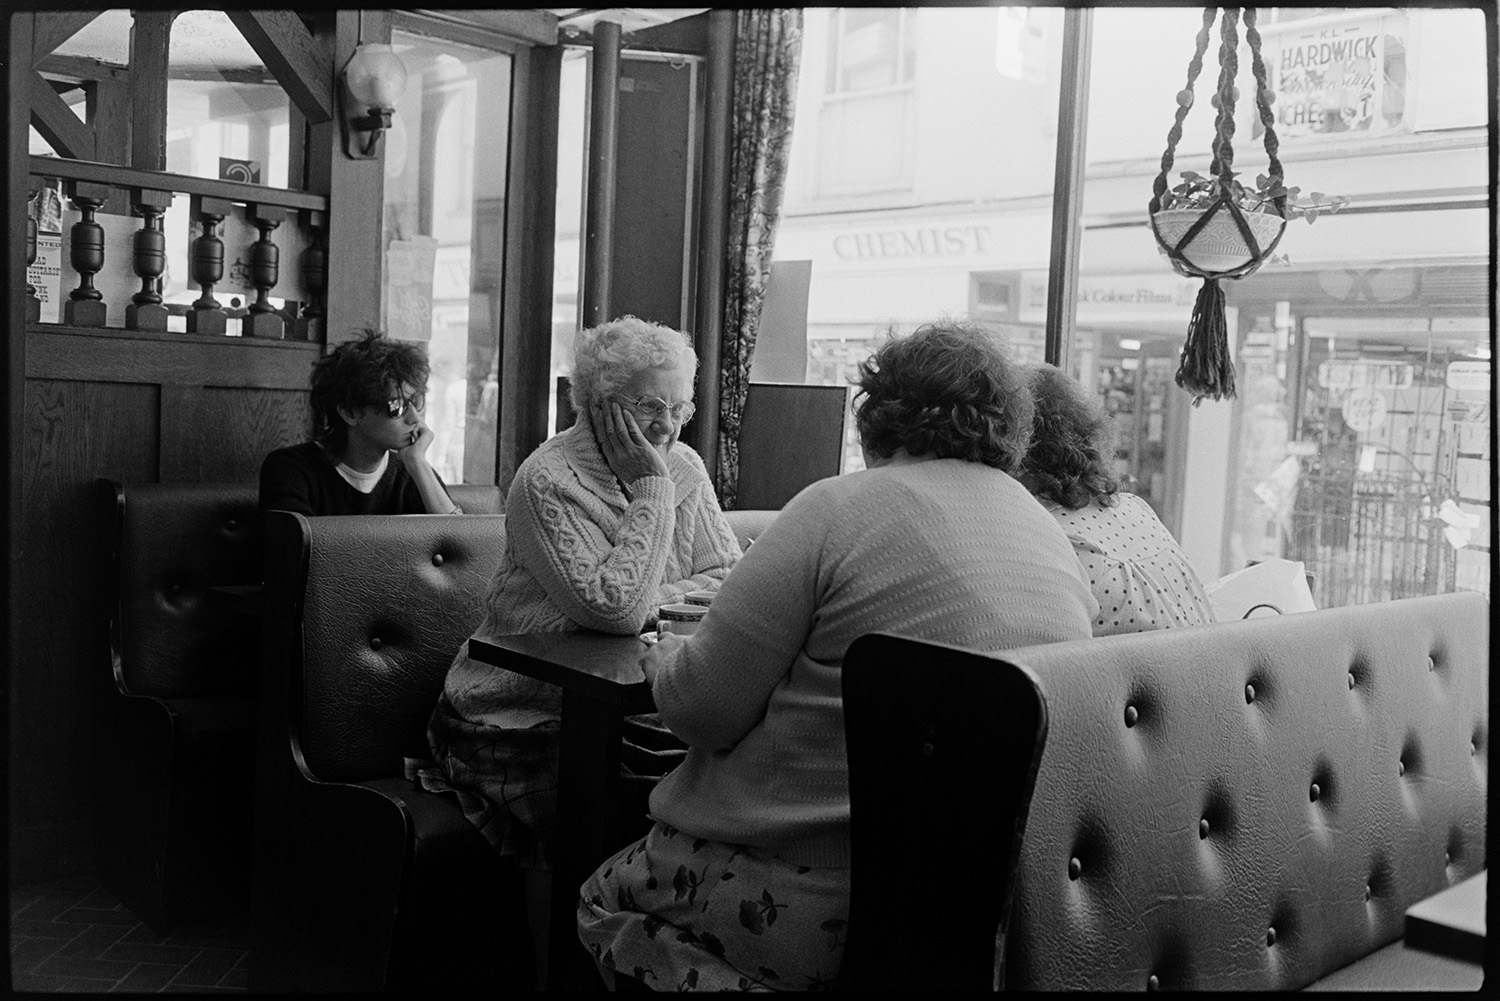 People sitting in restaurant having tea or coffee. 
[Women sat in a booth in a restaurant or café in Mill Street, Bideford. A young man is sat at the table behind them.]